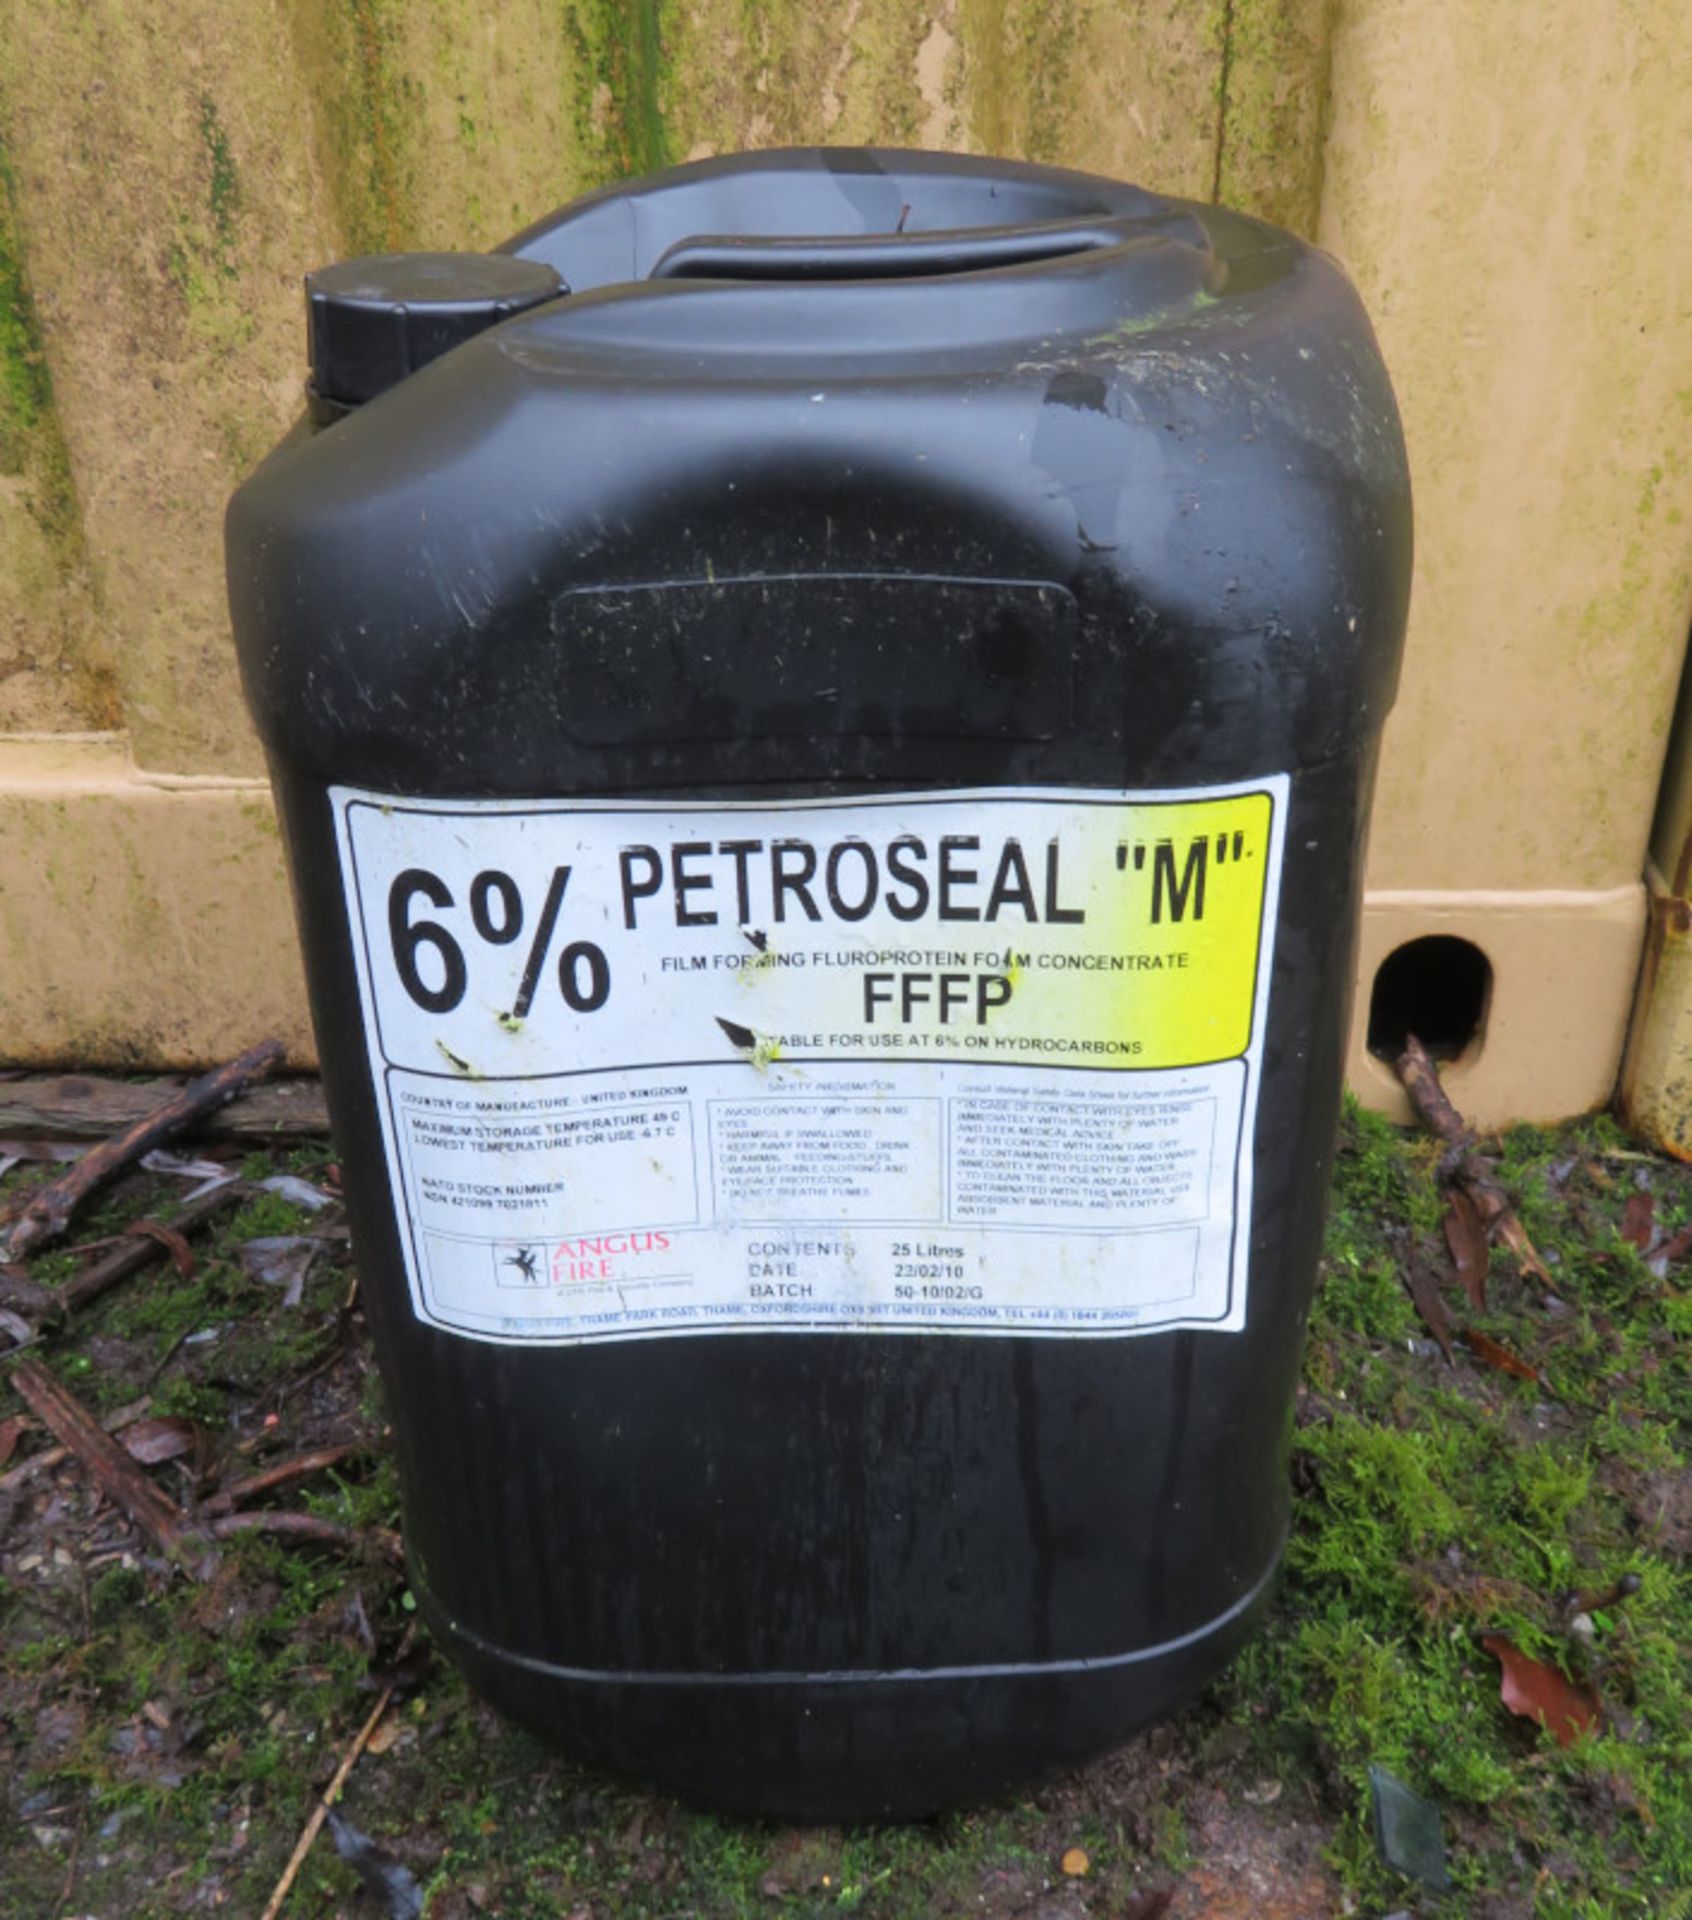 18x Angus Fire 6% Petroseal 'M' Film Foaming Fluroprotein Foam Concentrate - 25L - PLEASE - Image 3 of 4